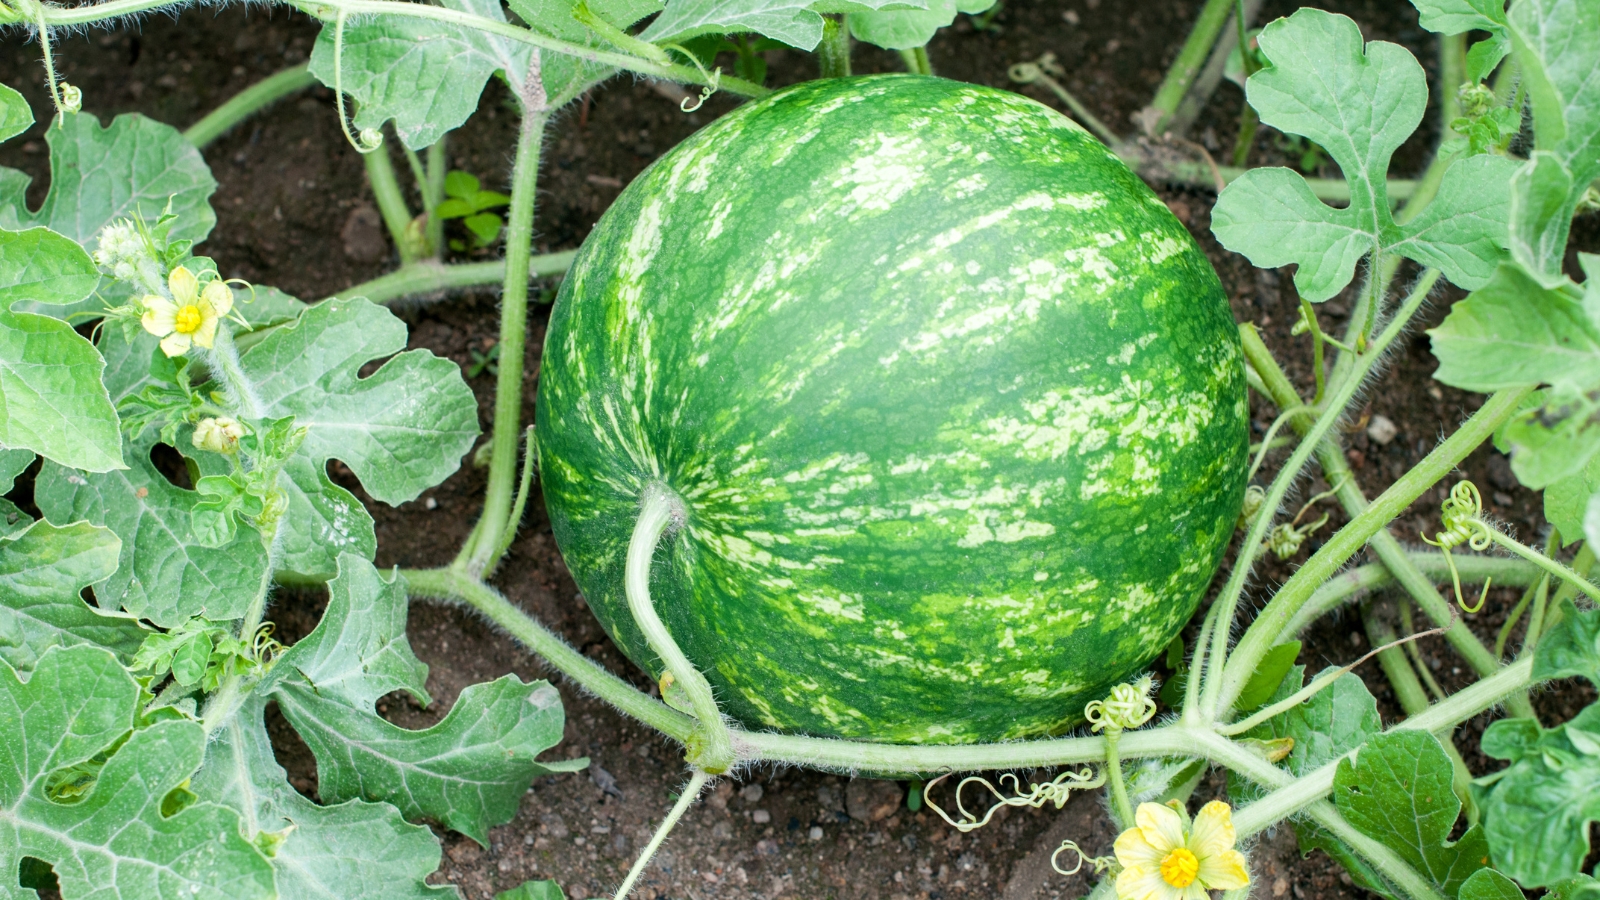 Watermelon variety growing in garden attached to vining plant in garden bed